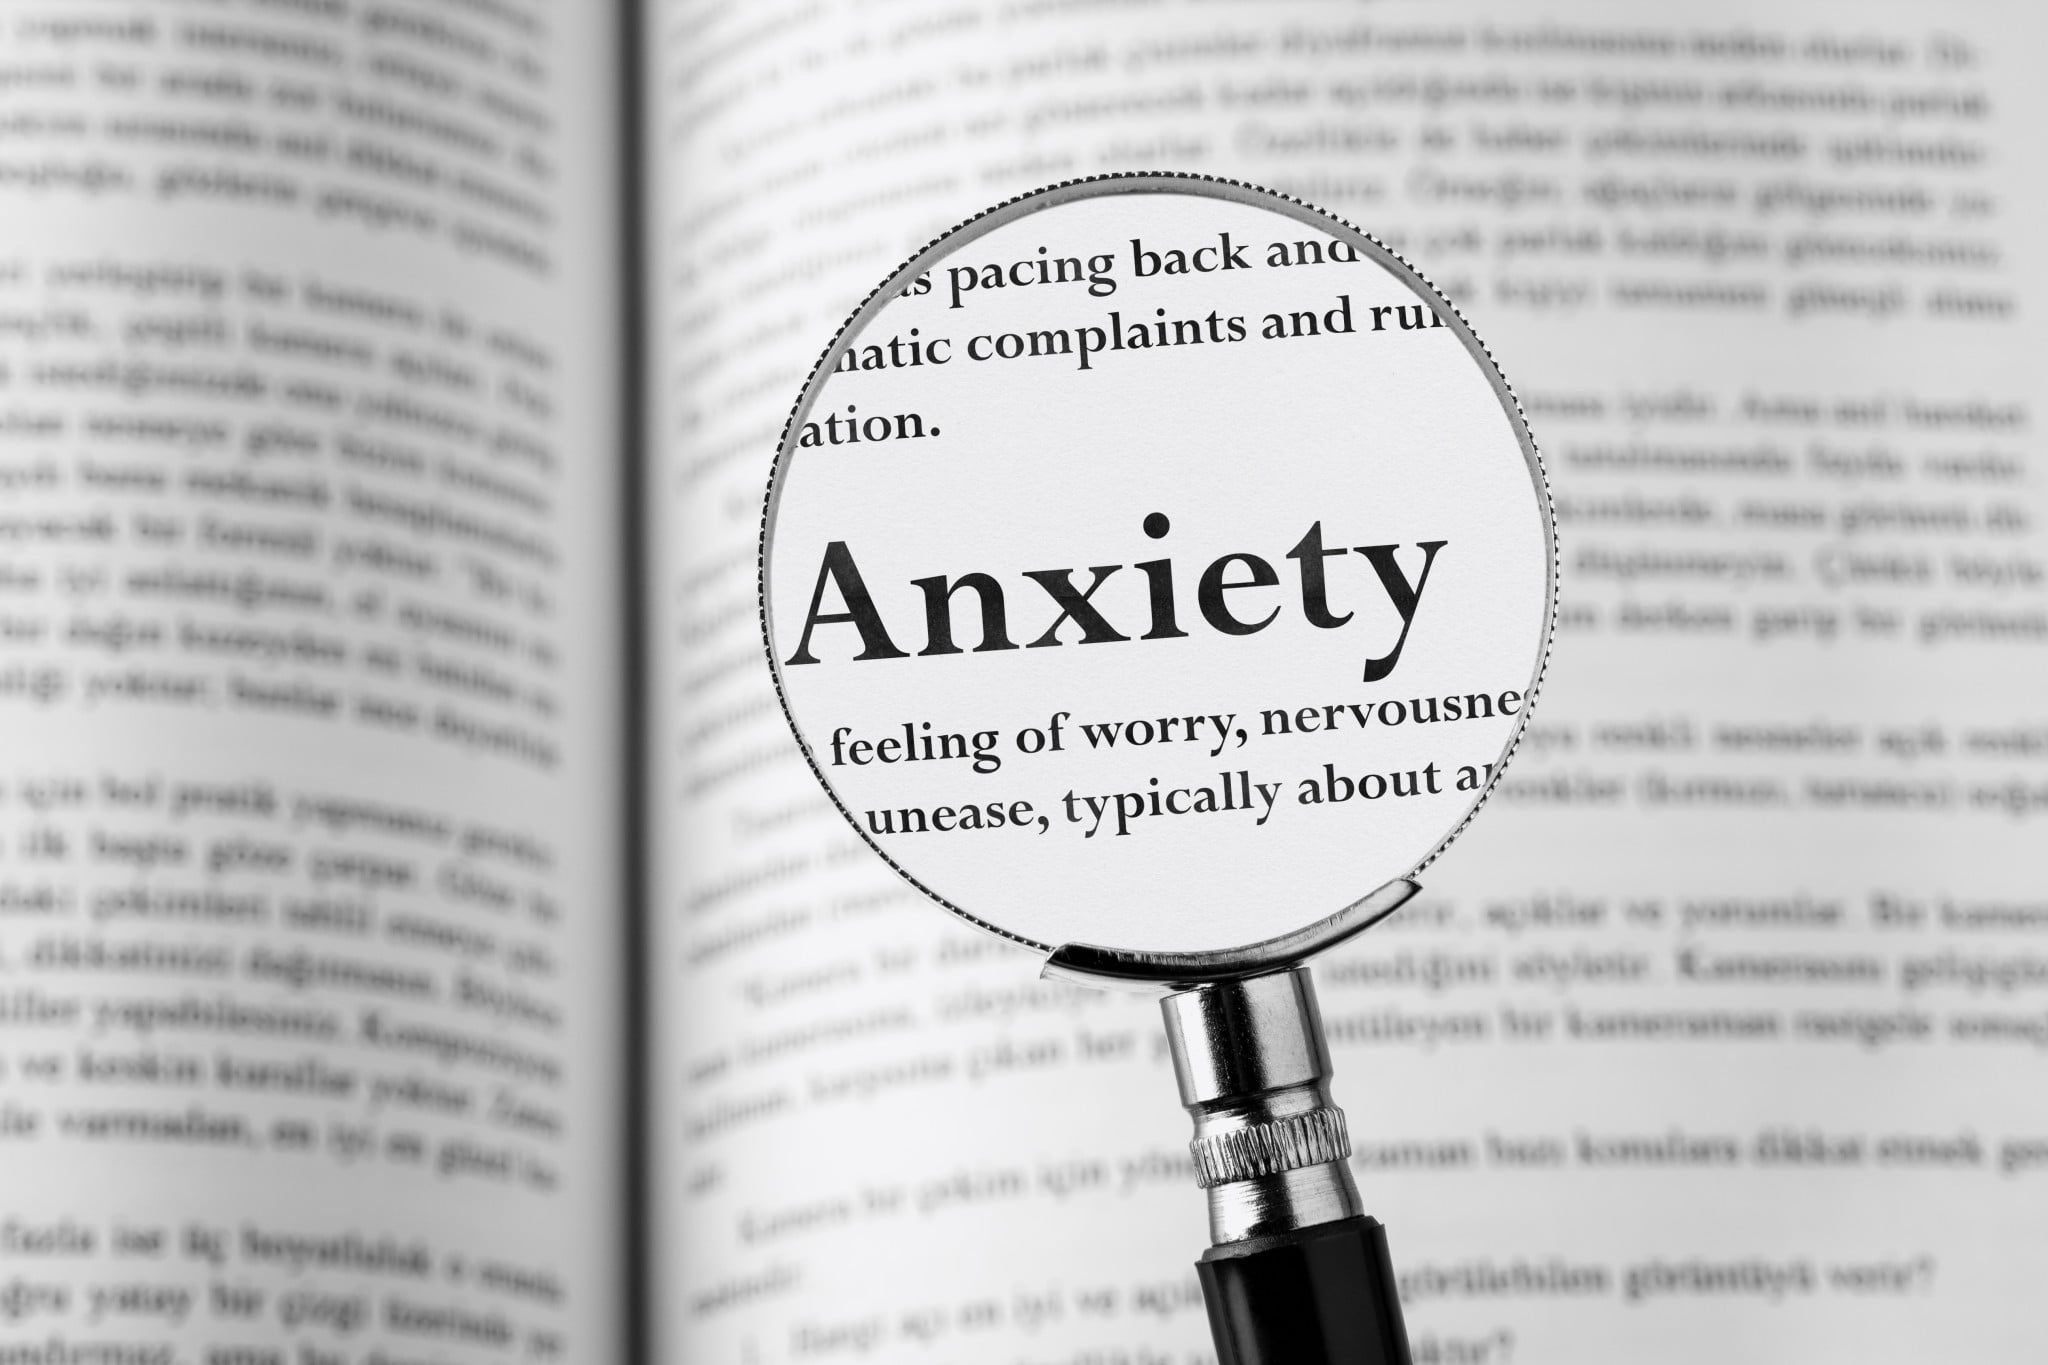 magnifying glass over the word "anxiety"